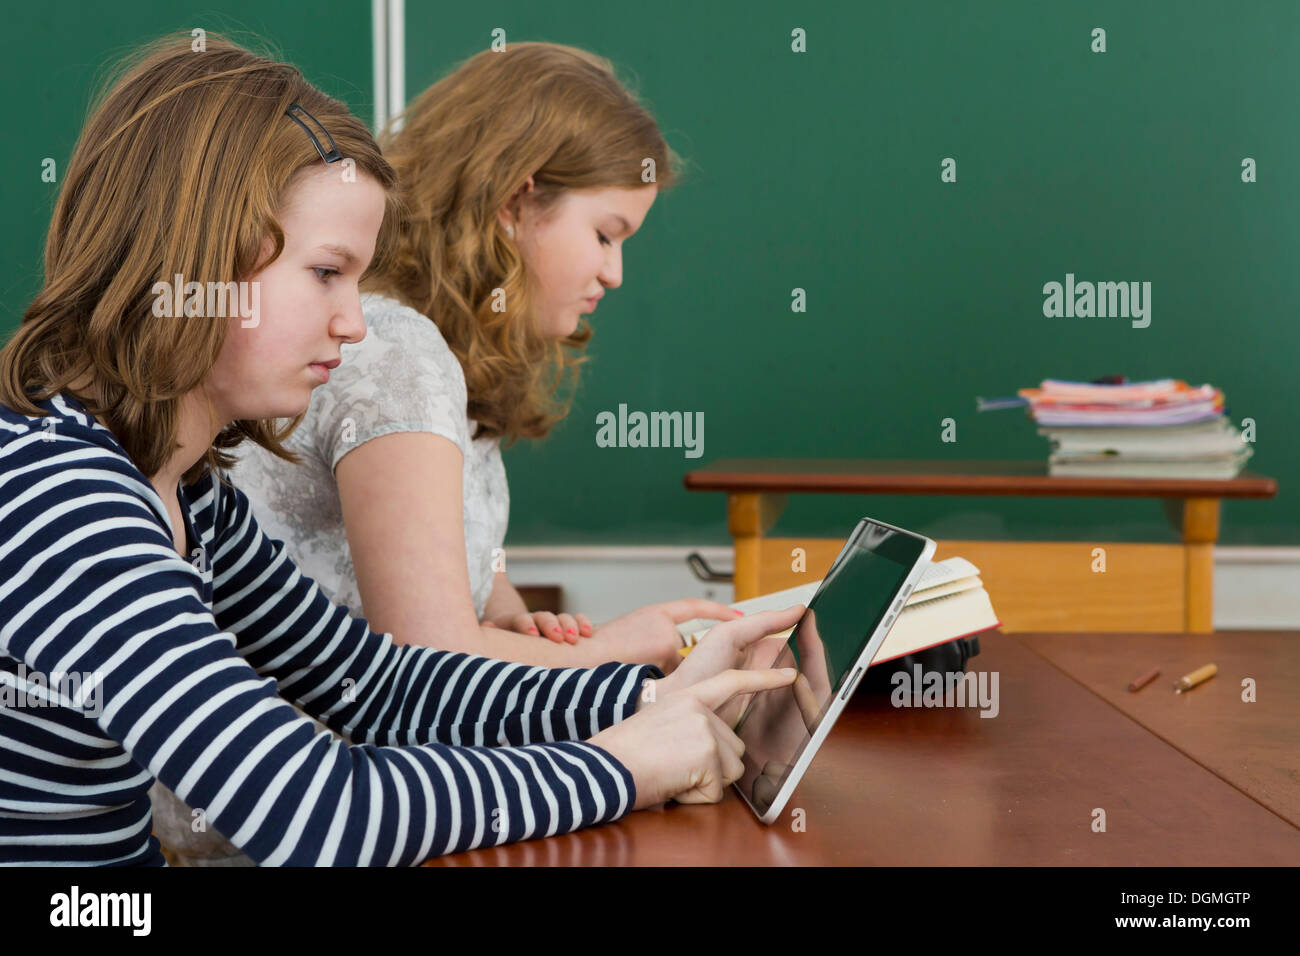 Two schoolgirls in the classroom, one is reading a book, the other is using a tablet PC, Germany Stock Photo